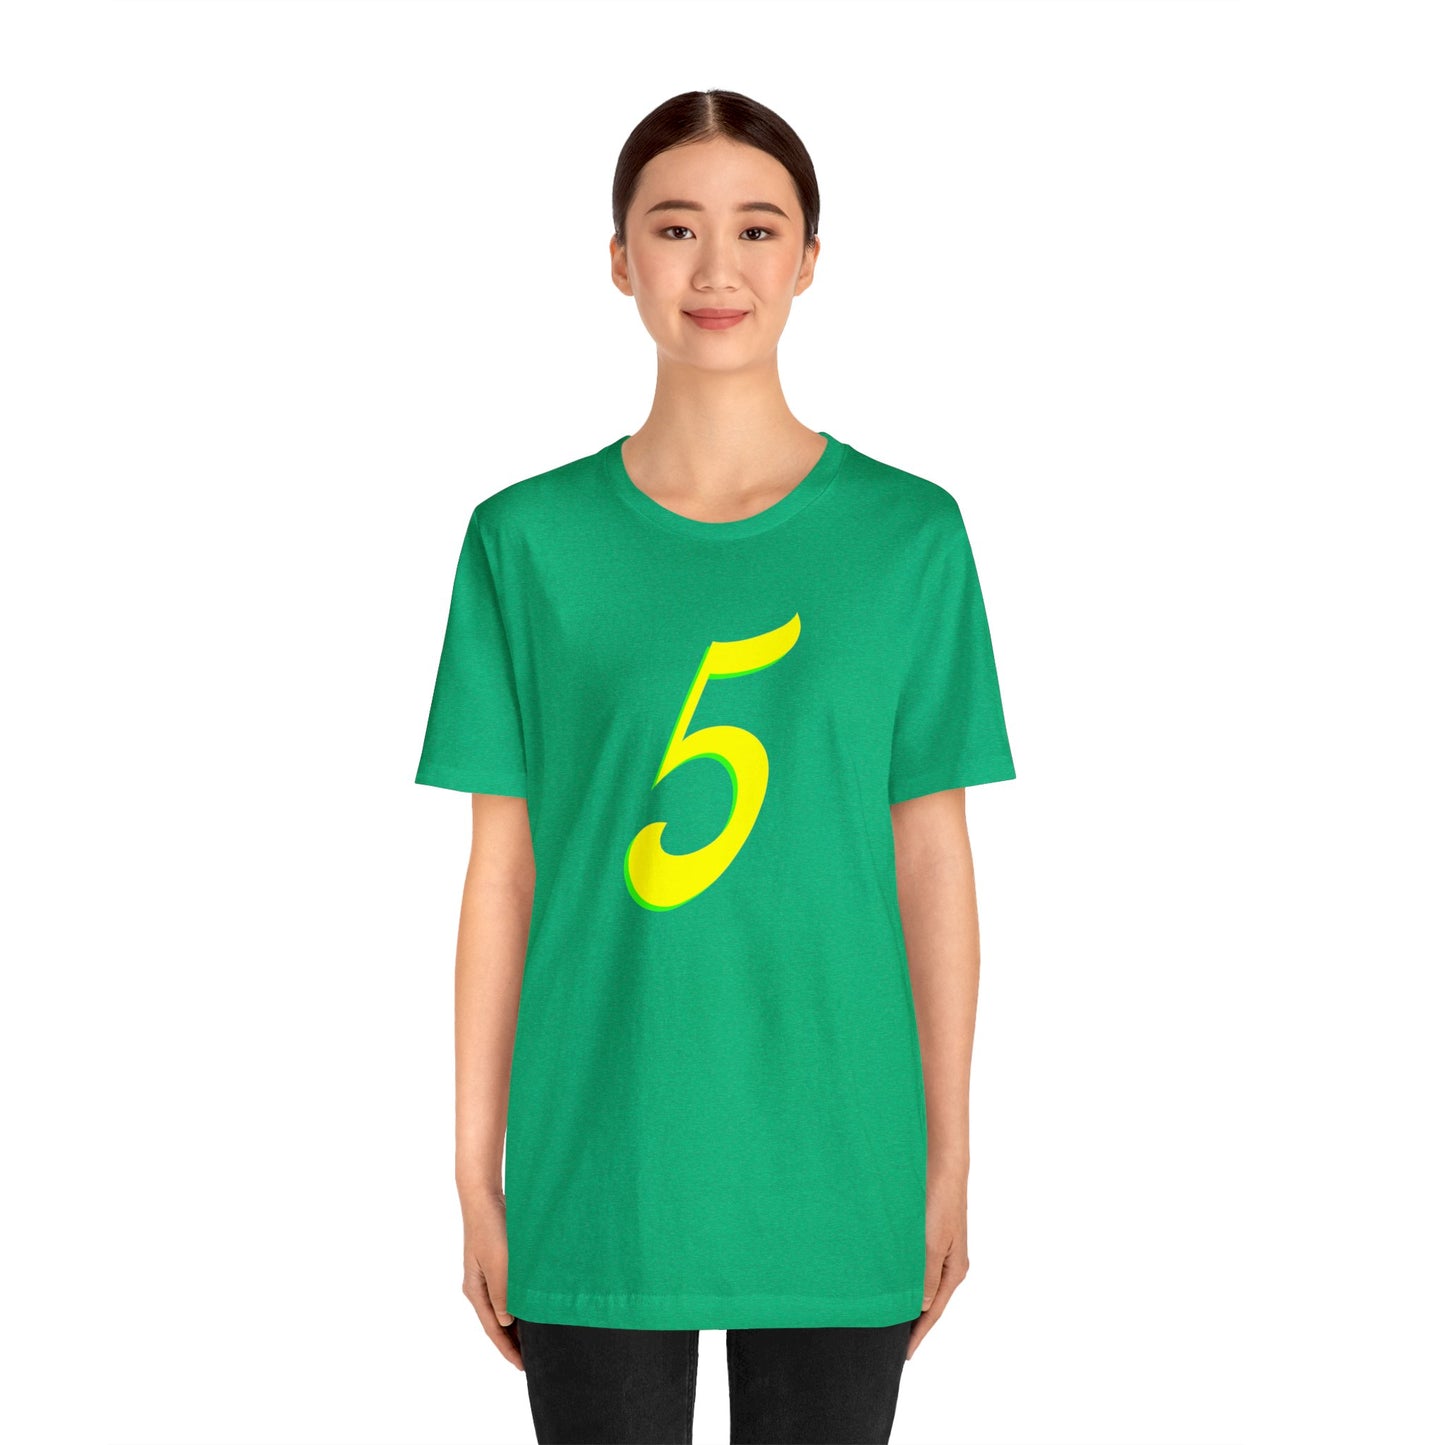 Number 5 Design - Soft Cotton Tee for birthdays and celebrations, Gift for friends and family, Multiple Options by clothezy.com in Black Size Medium - Buy Now